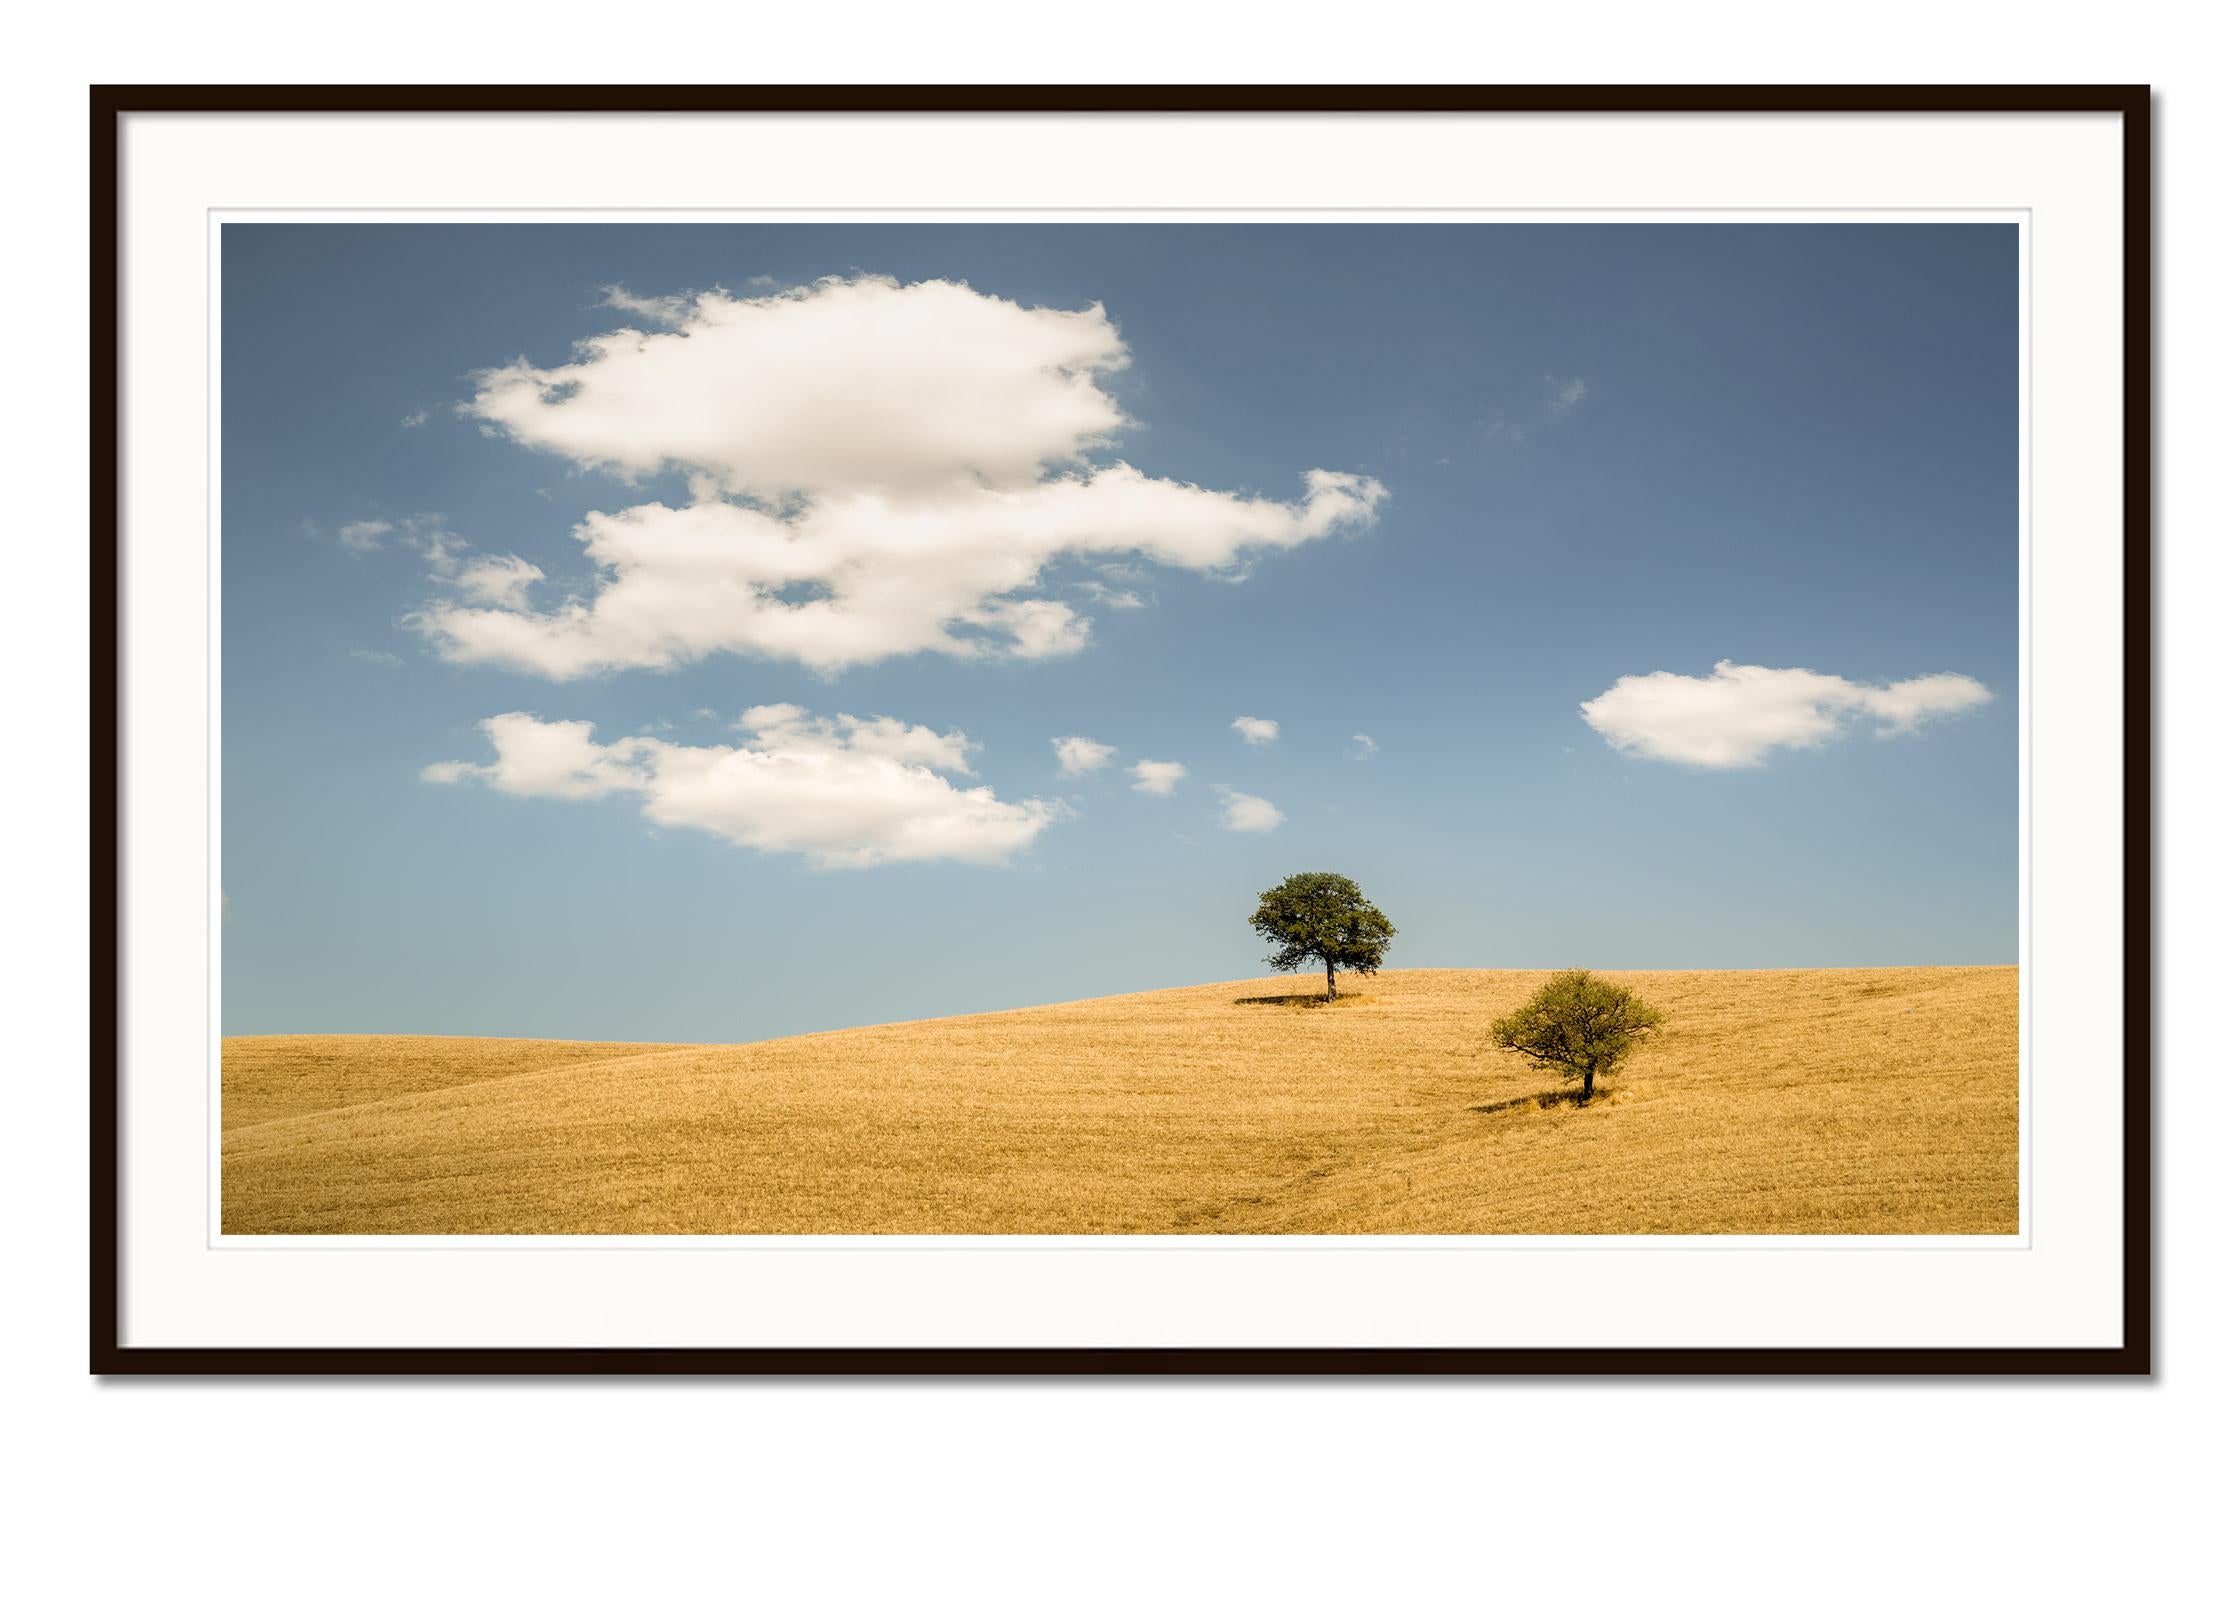 Rolling hills with Trees #2, Tuscany, Italy, Colour art photography, landscape - Gray Landscape Photograph by Gerald Berghammer